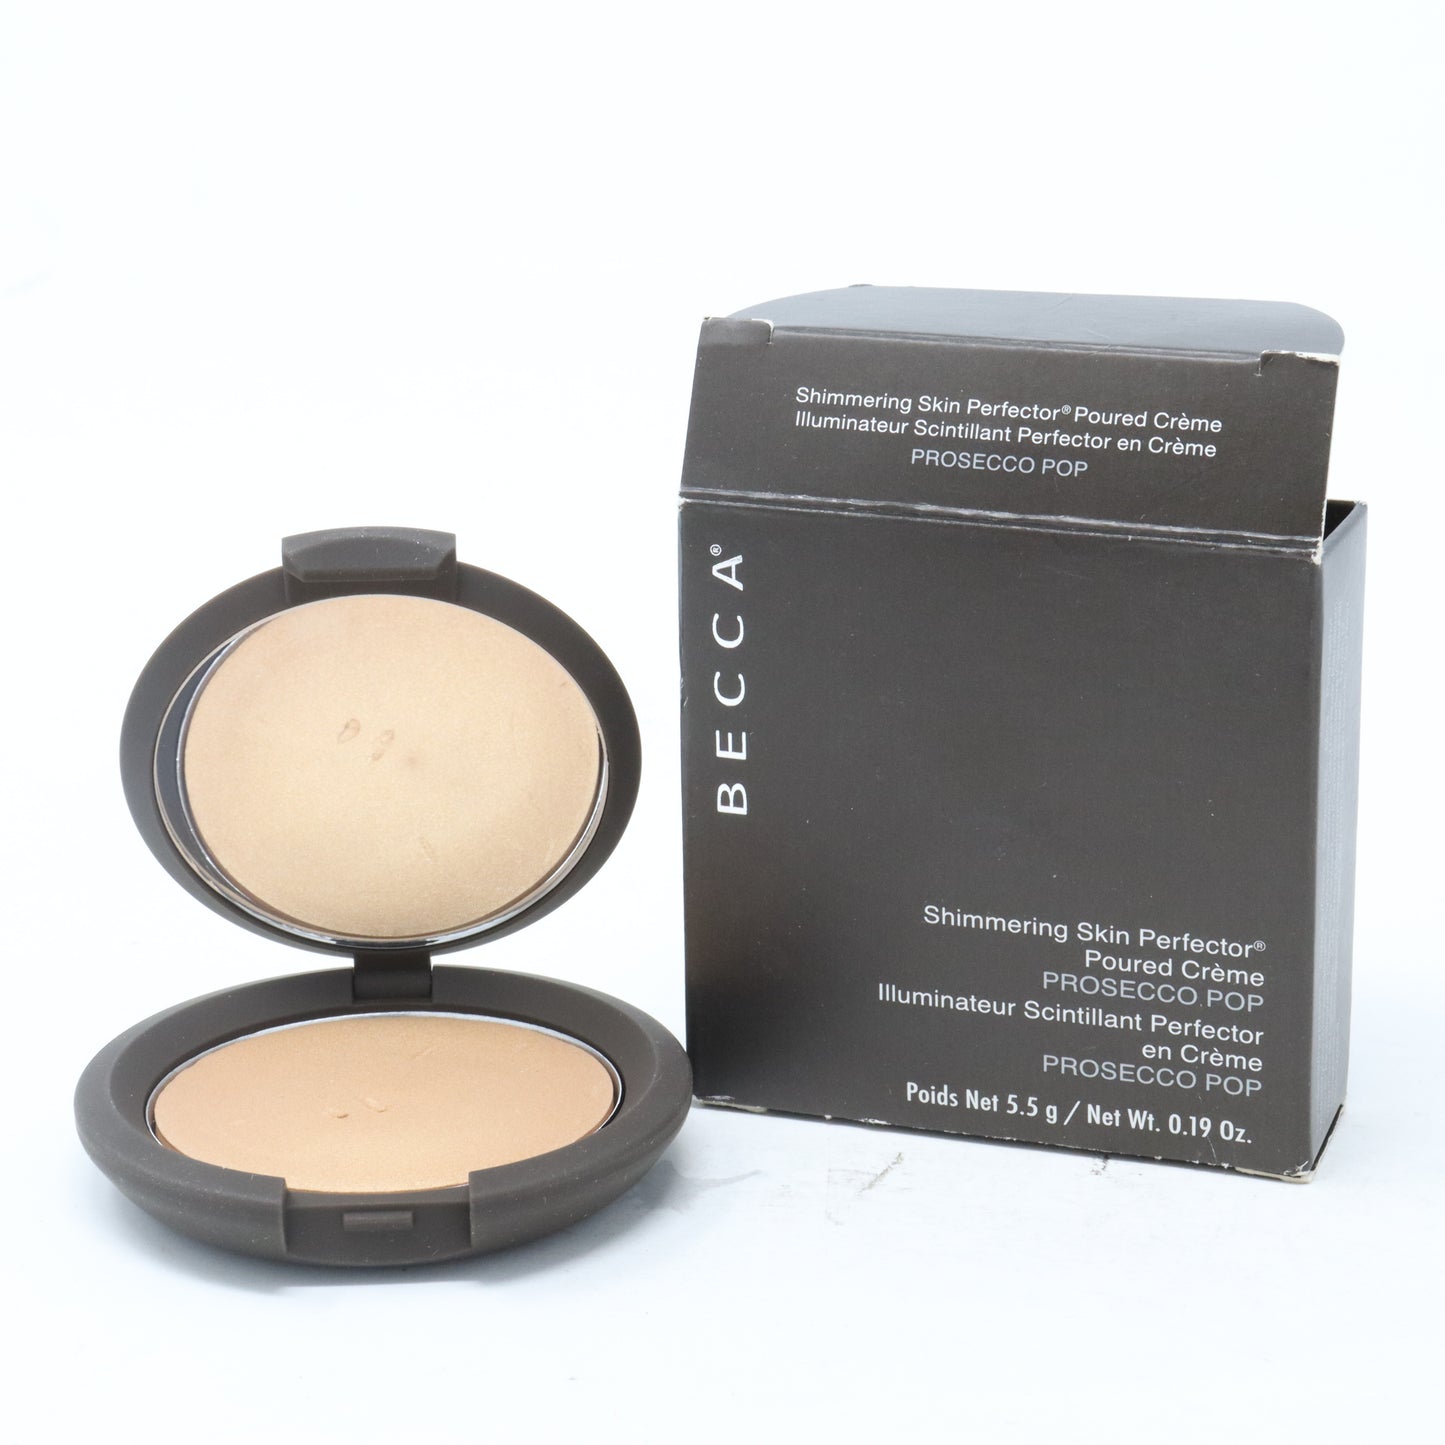 Shimmering Skin Perfector Poured Creme